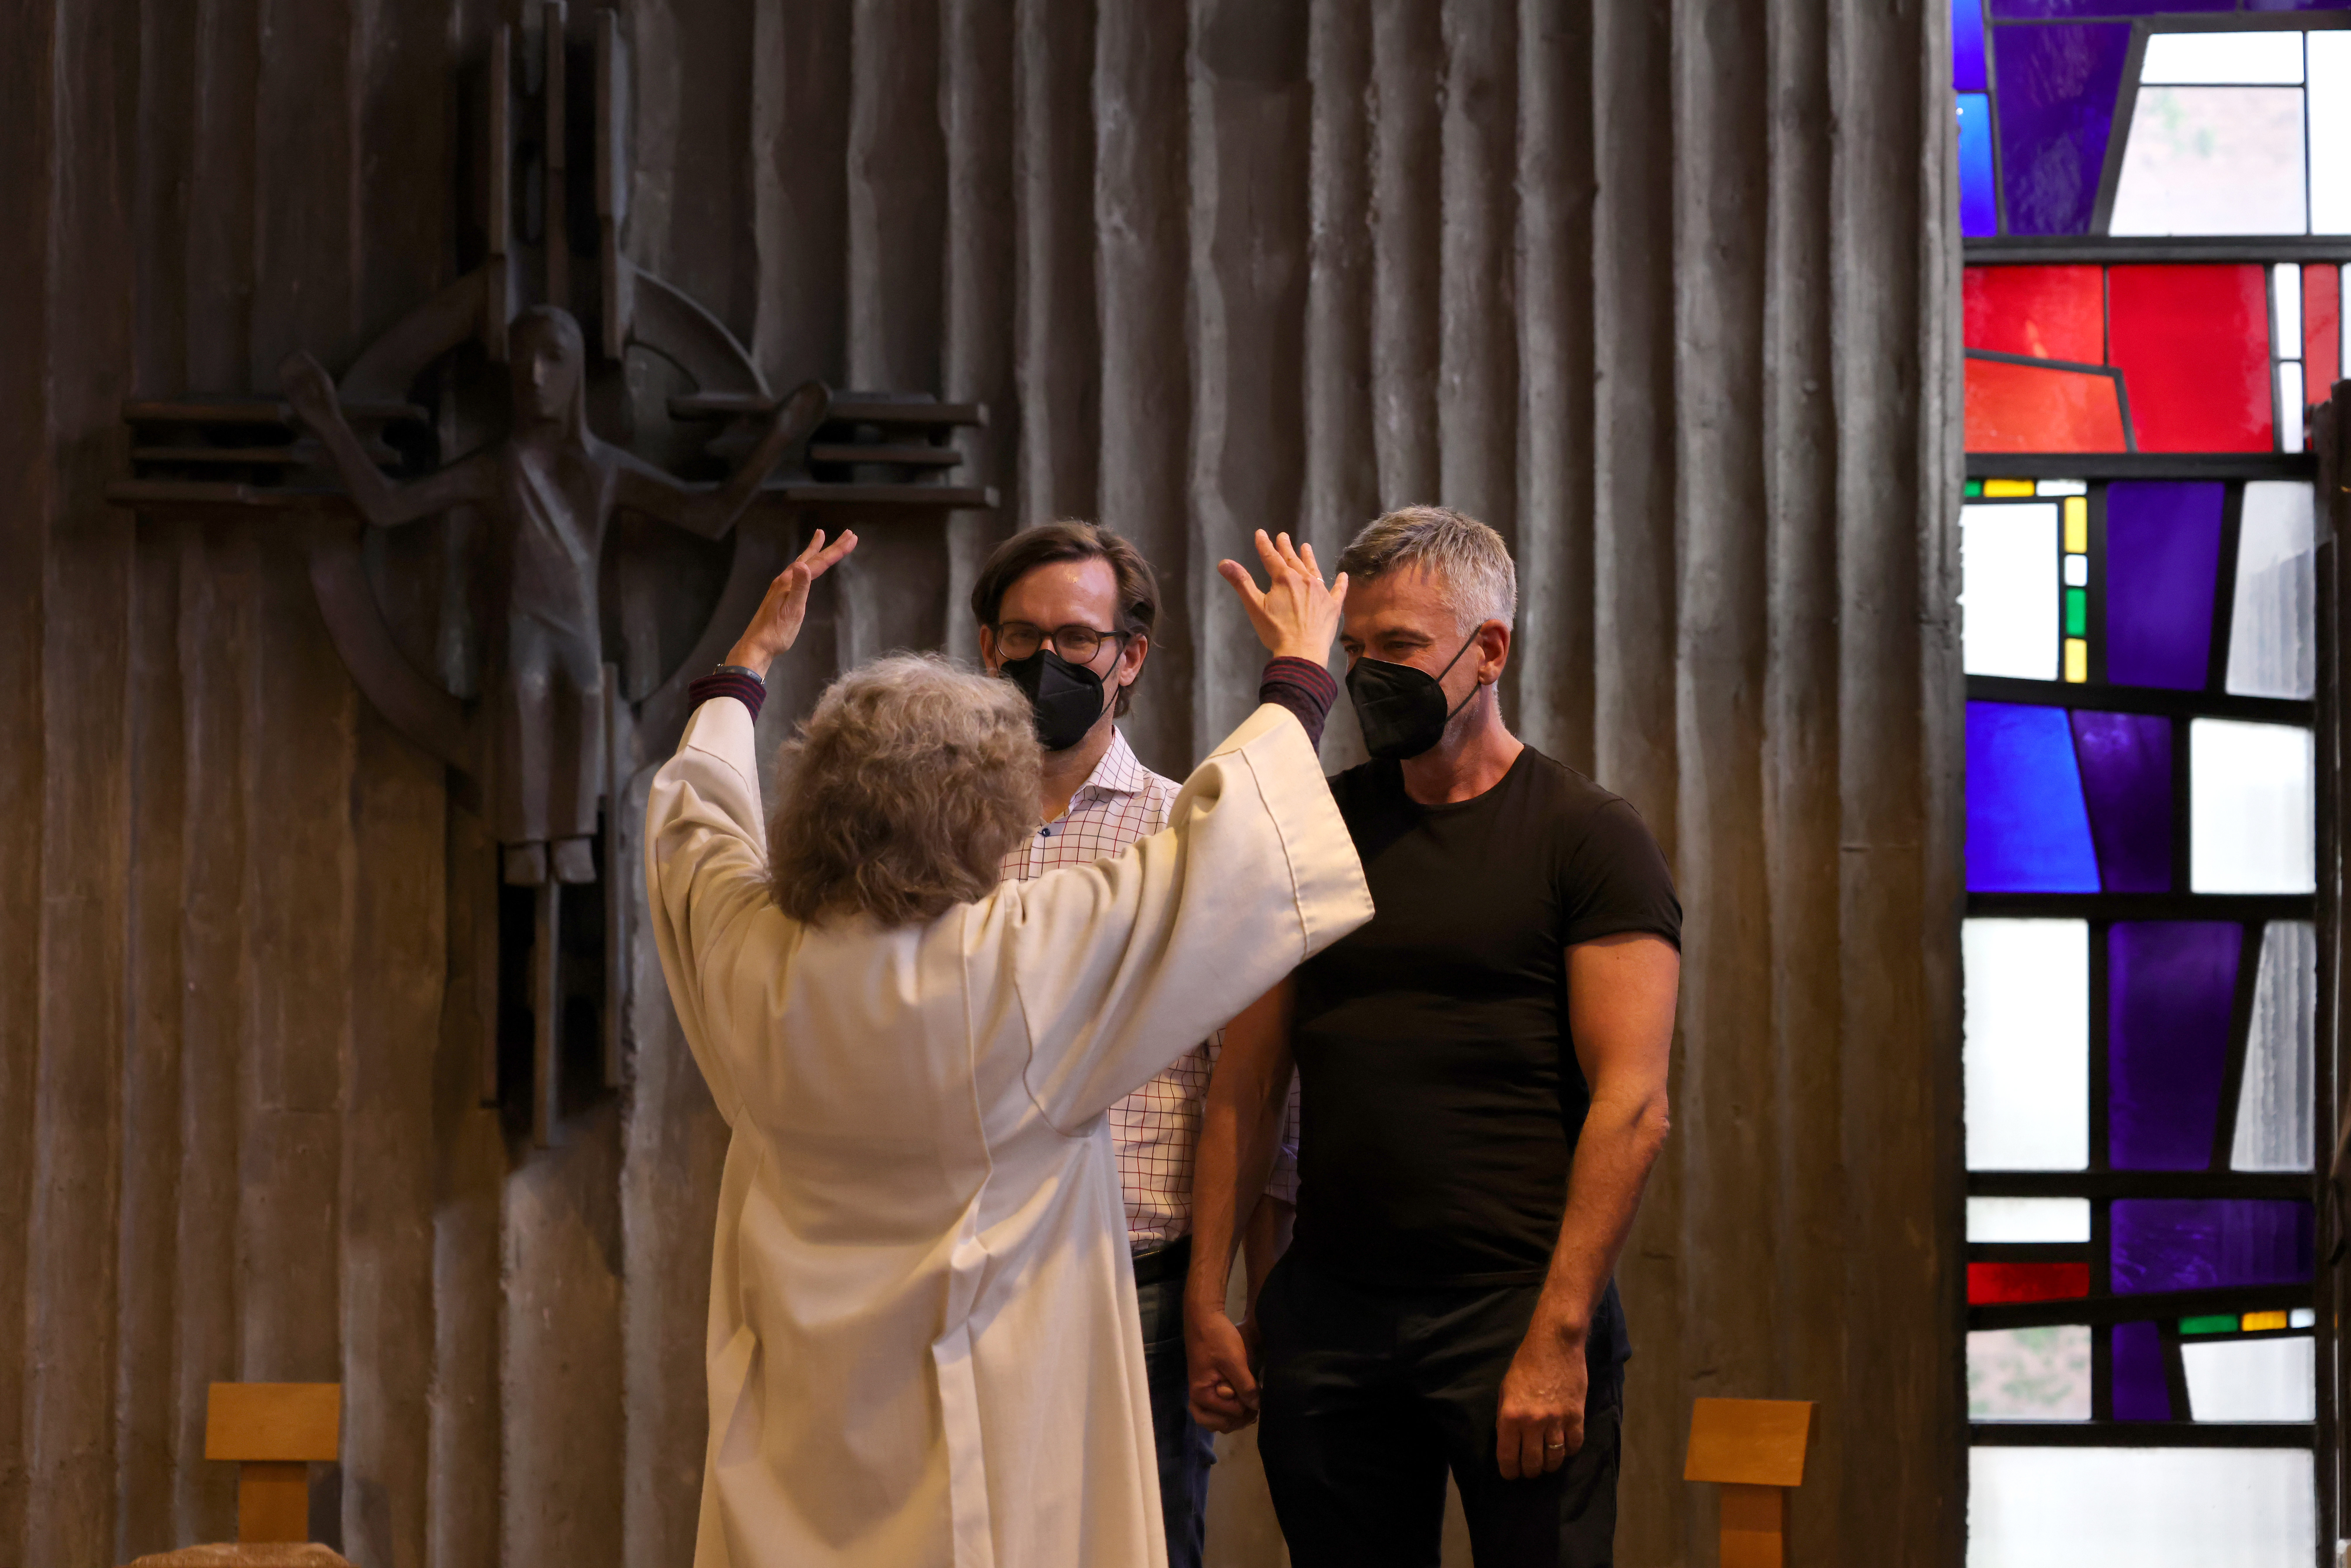 Brigitte Schmidt, a pastoral worker blesses a same-sex couple, Ralf Michael Berger and Andreas Helfrich, at the Catholic St. Johannes XXIII church in Cologne, Germany.